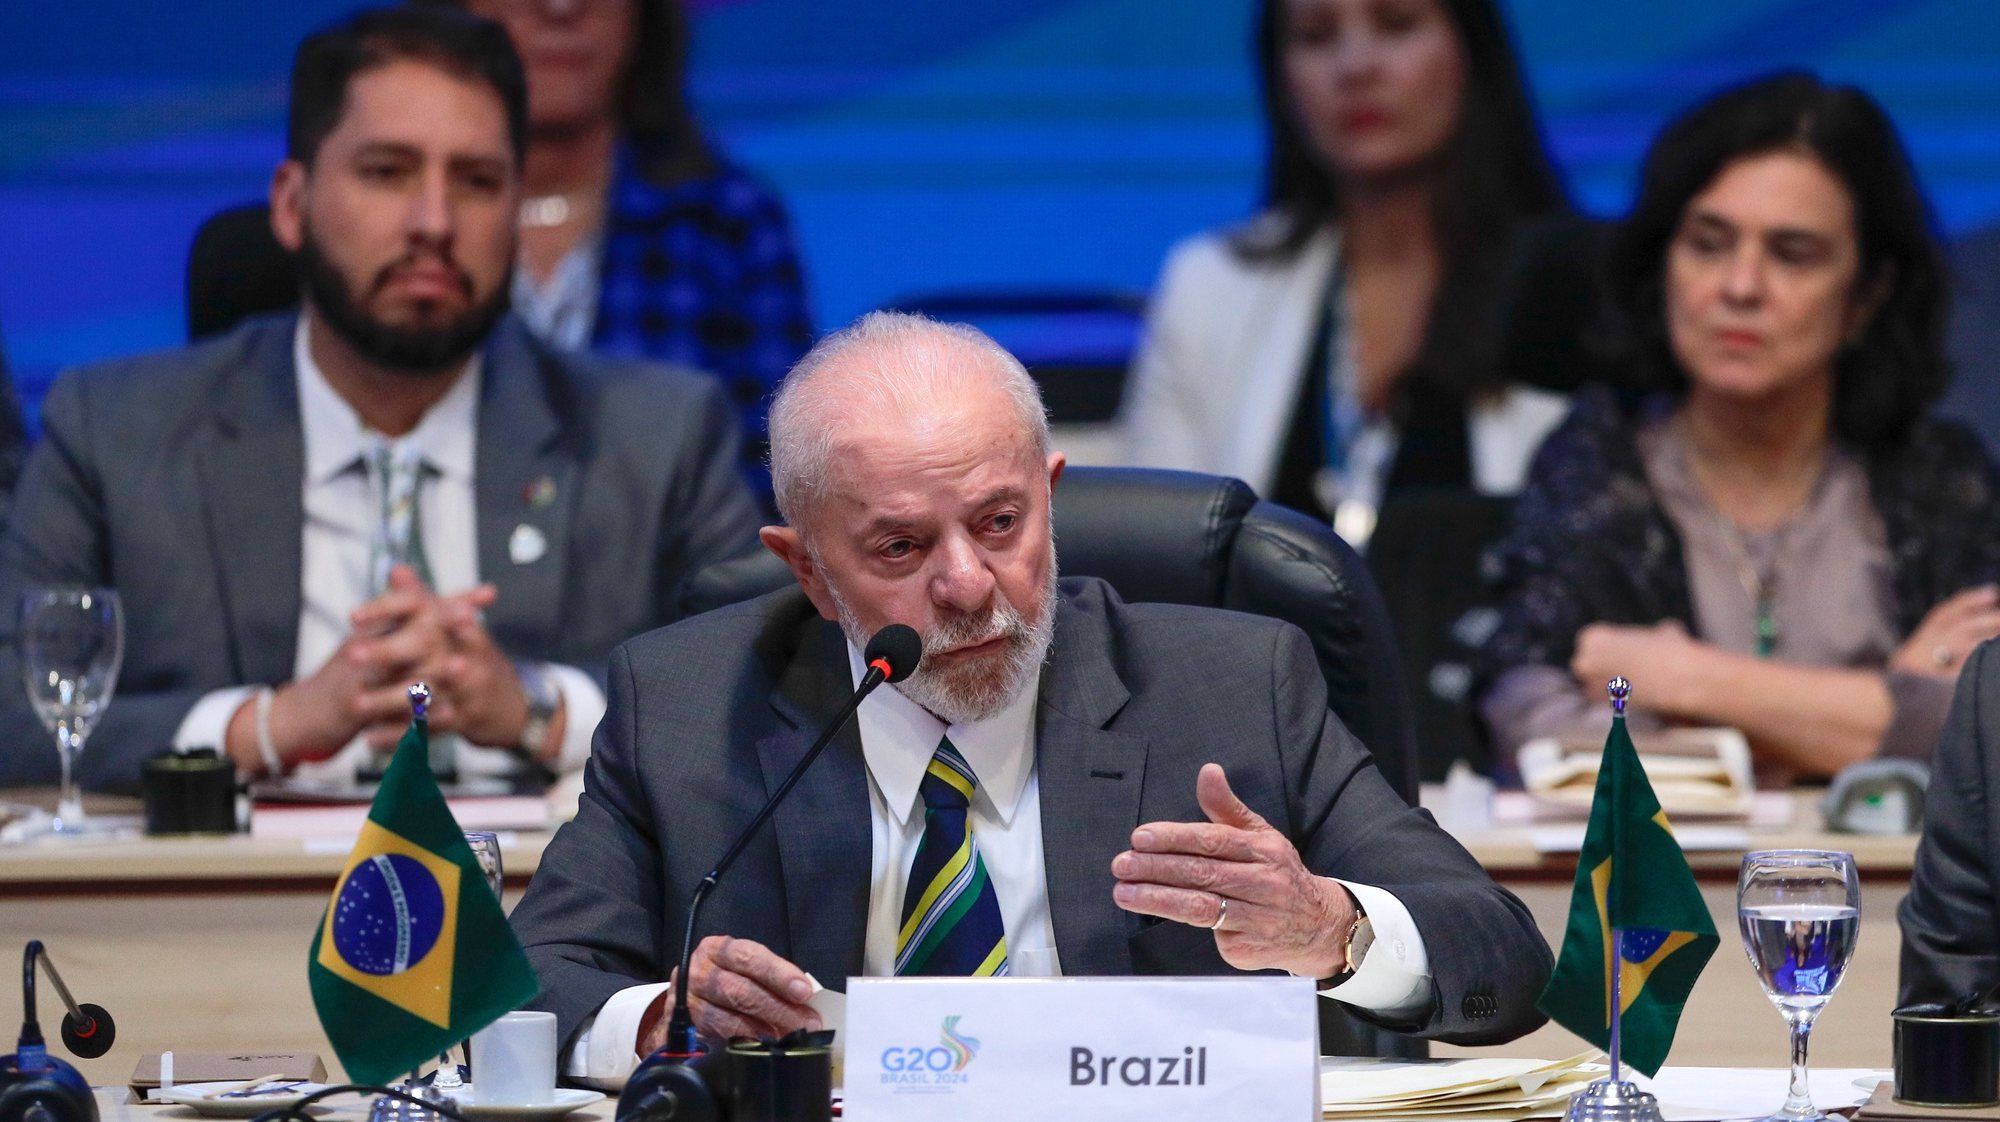 epa11494289 The President of Brazil, Luiz Inacio Lula da Silva, speaks during the opening of the Global Alliance against Hunger and Poverty meeting at the G20 Brazil 2024, held at the headquarters of the NGO Acao da Cidadania in Rio de Janeiro, Brazil, 24 July 2024. Lula da Silva introduced the Global Alliance against Hunger and Poverty and expressed regret that hunger continues to be the most challenging issue for humanity in the 21st century.  EPA/ANDRE COELHO